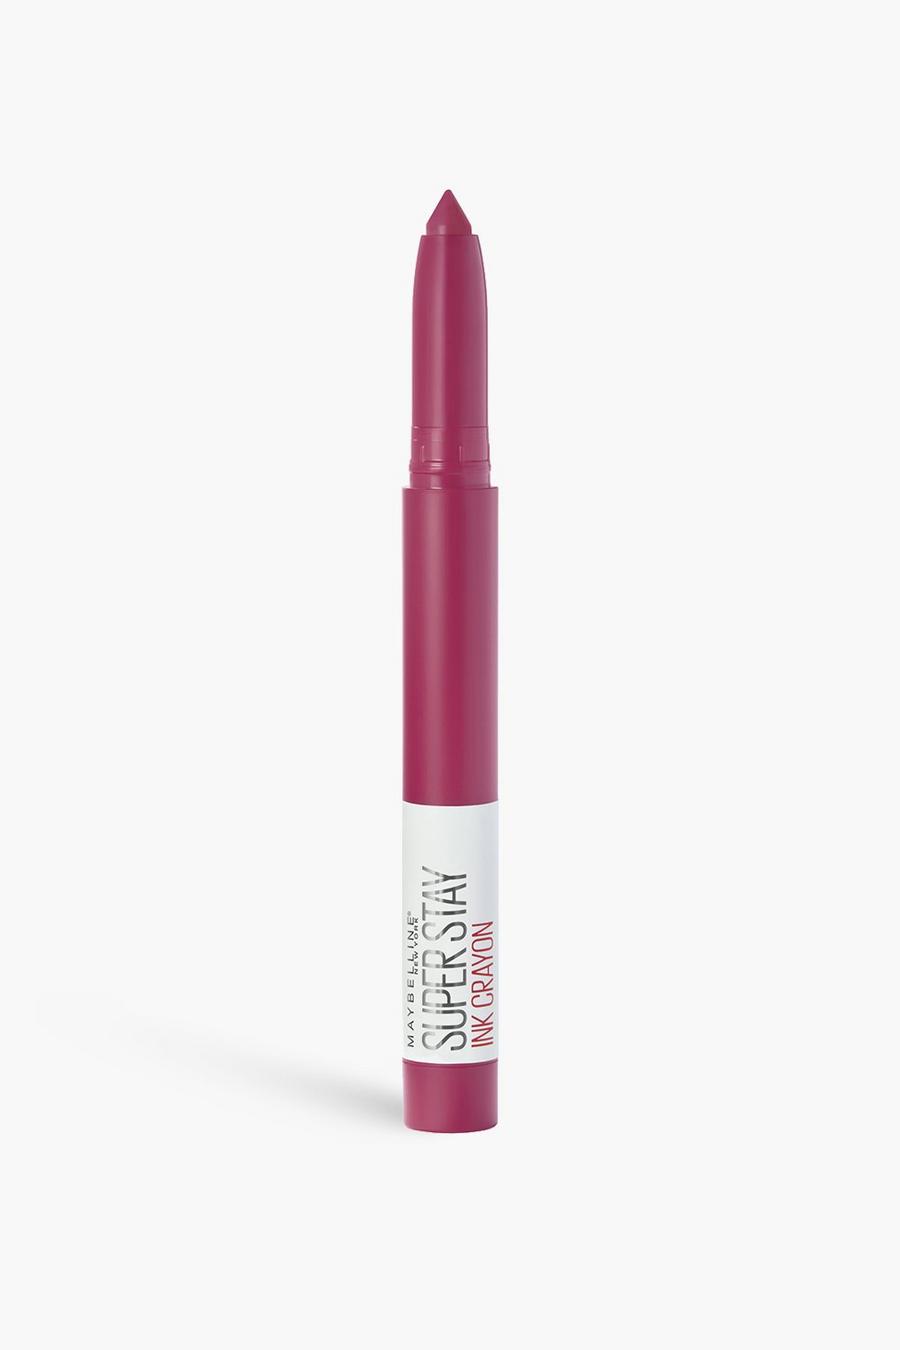 35 treat yourself Maybelline Superstay Matte Crayon Lipstick